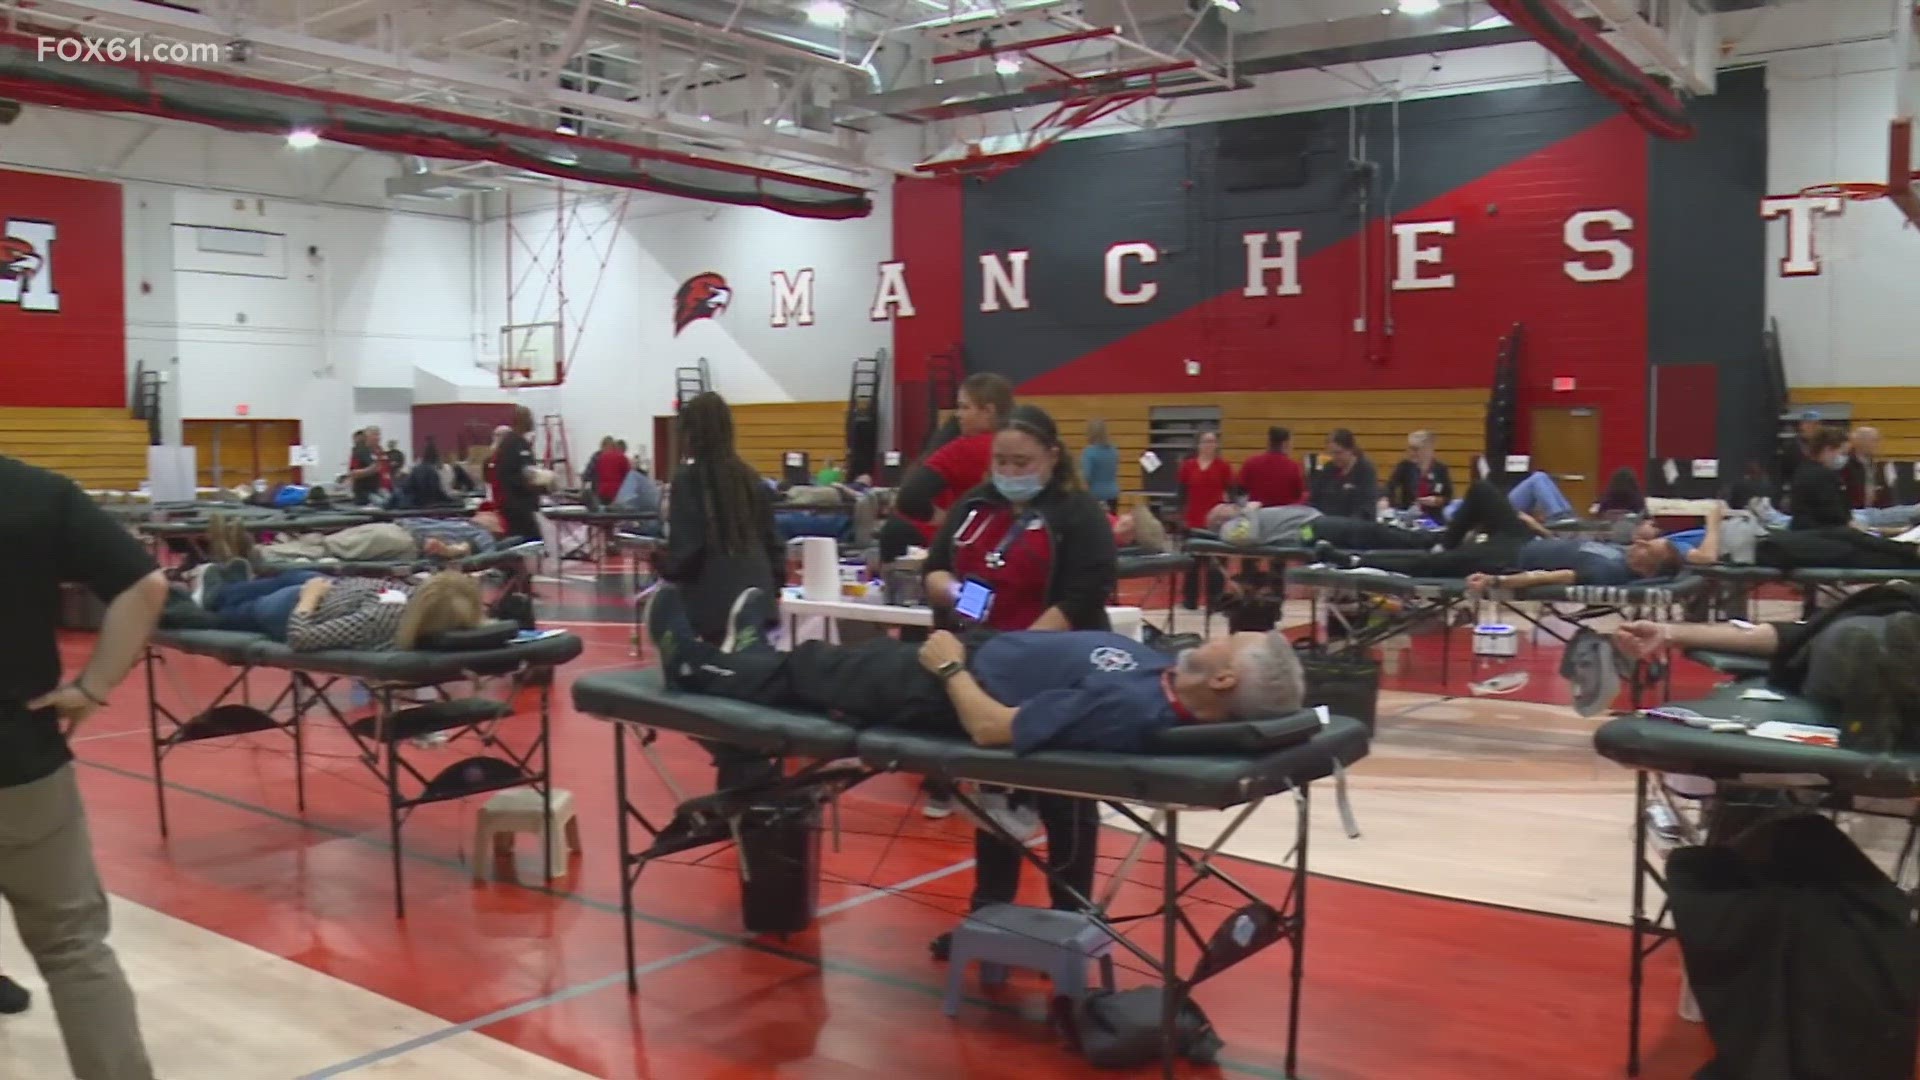 The blood collected will help 1,116 patients in need of blood, plasma and platelets.